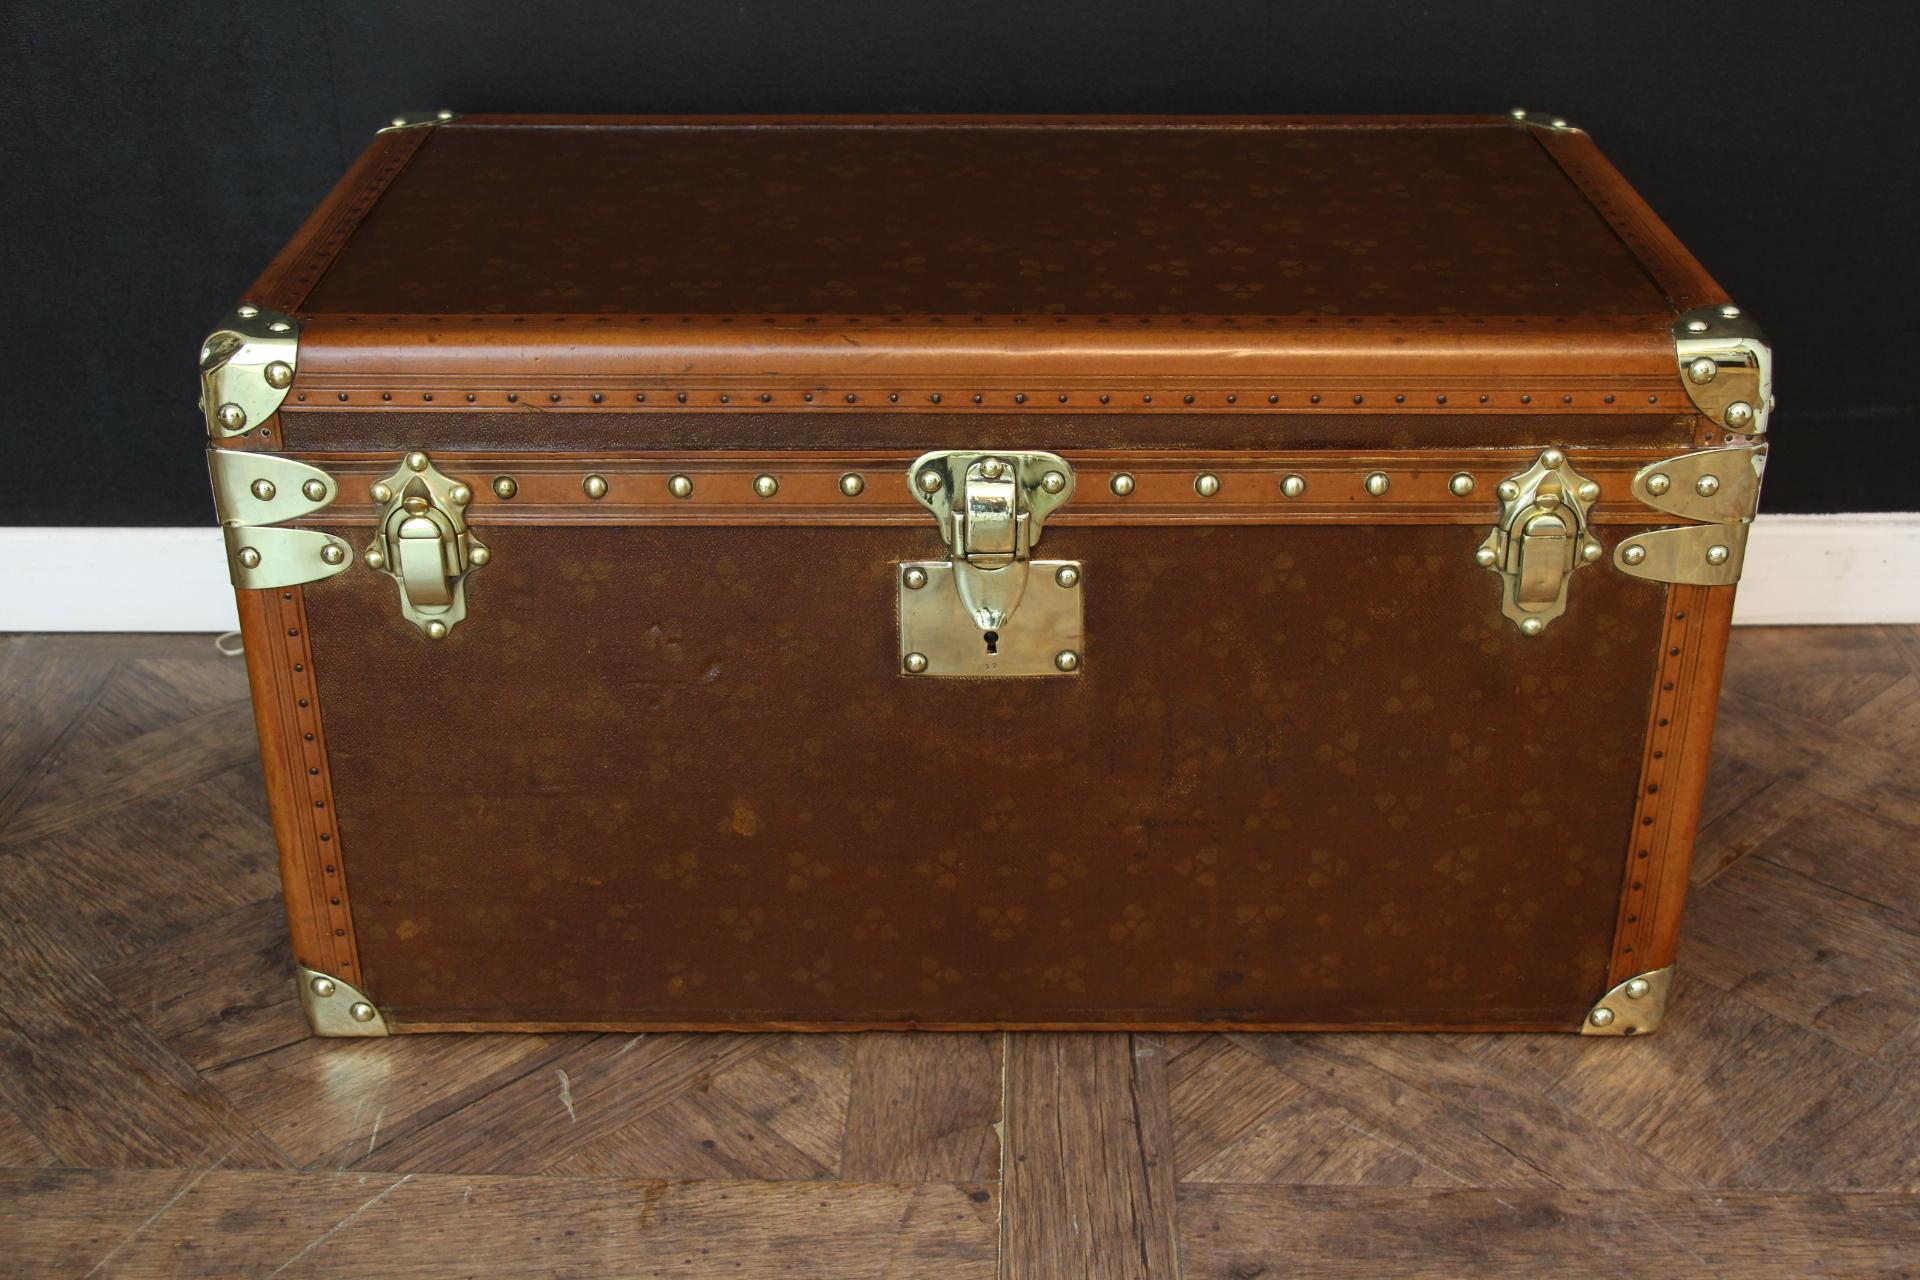 This magnificent shoe trunk features the very unusual and original 